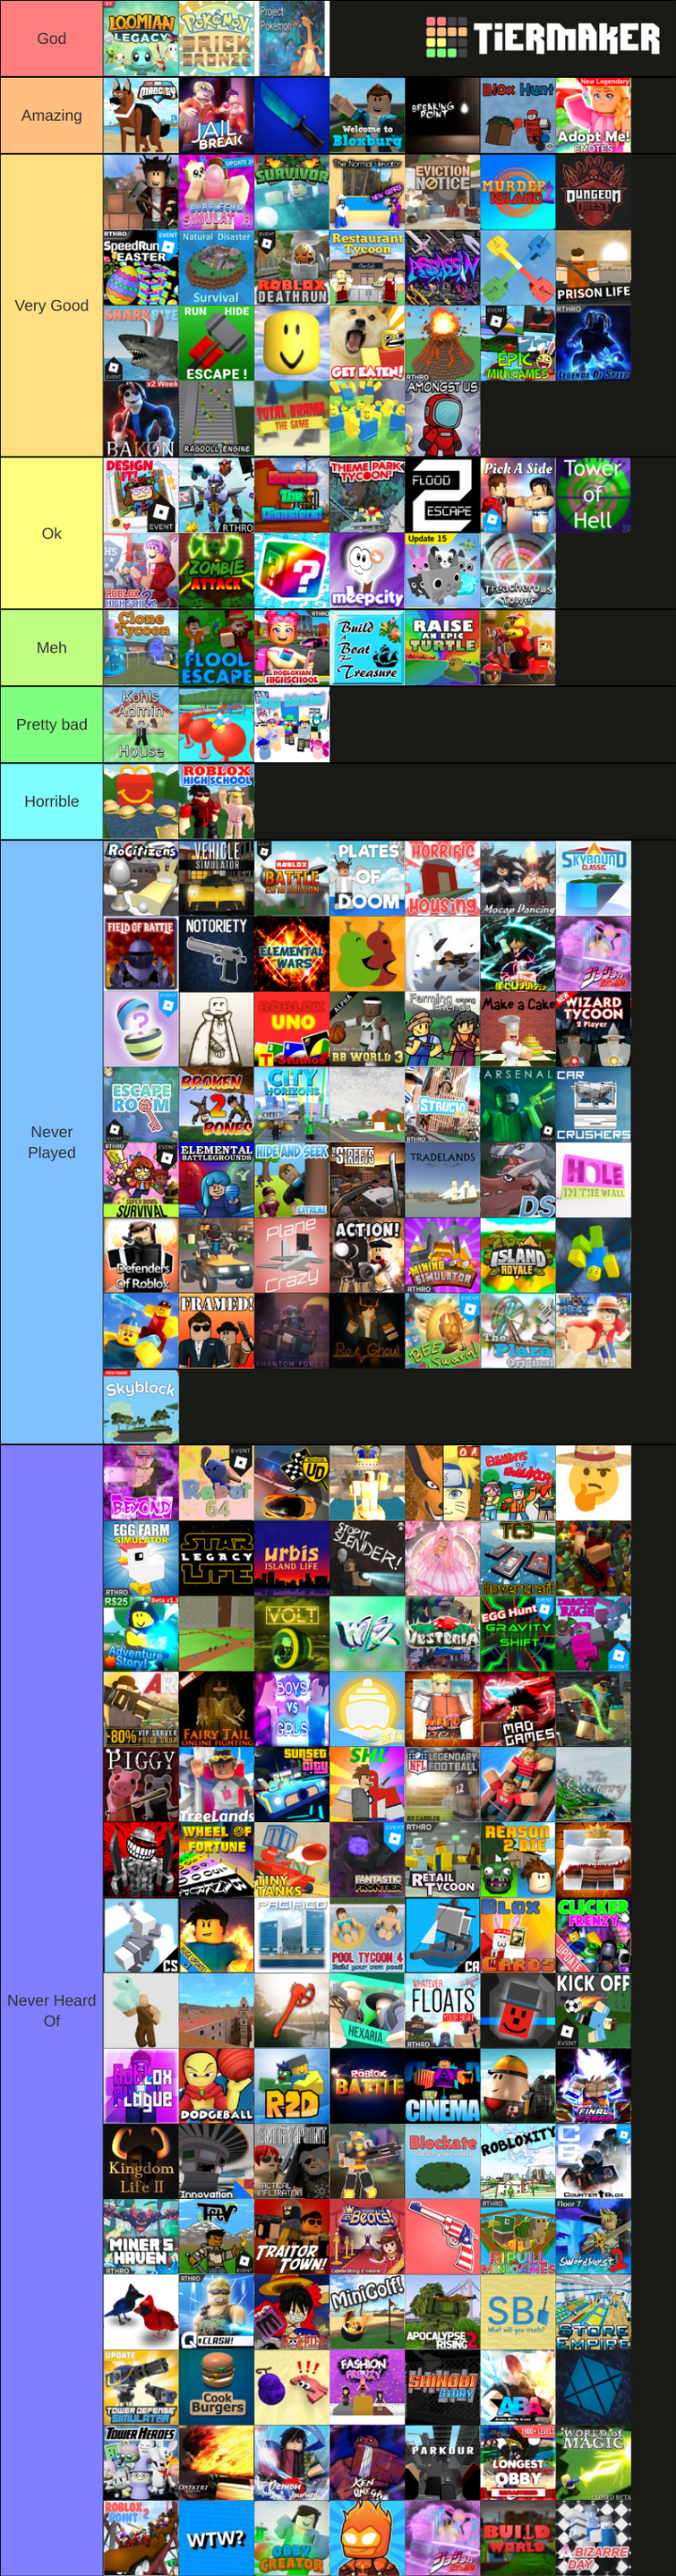 Pixilart - roblox games tier list uploaded by Someone101